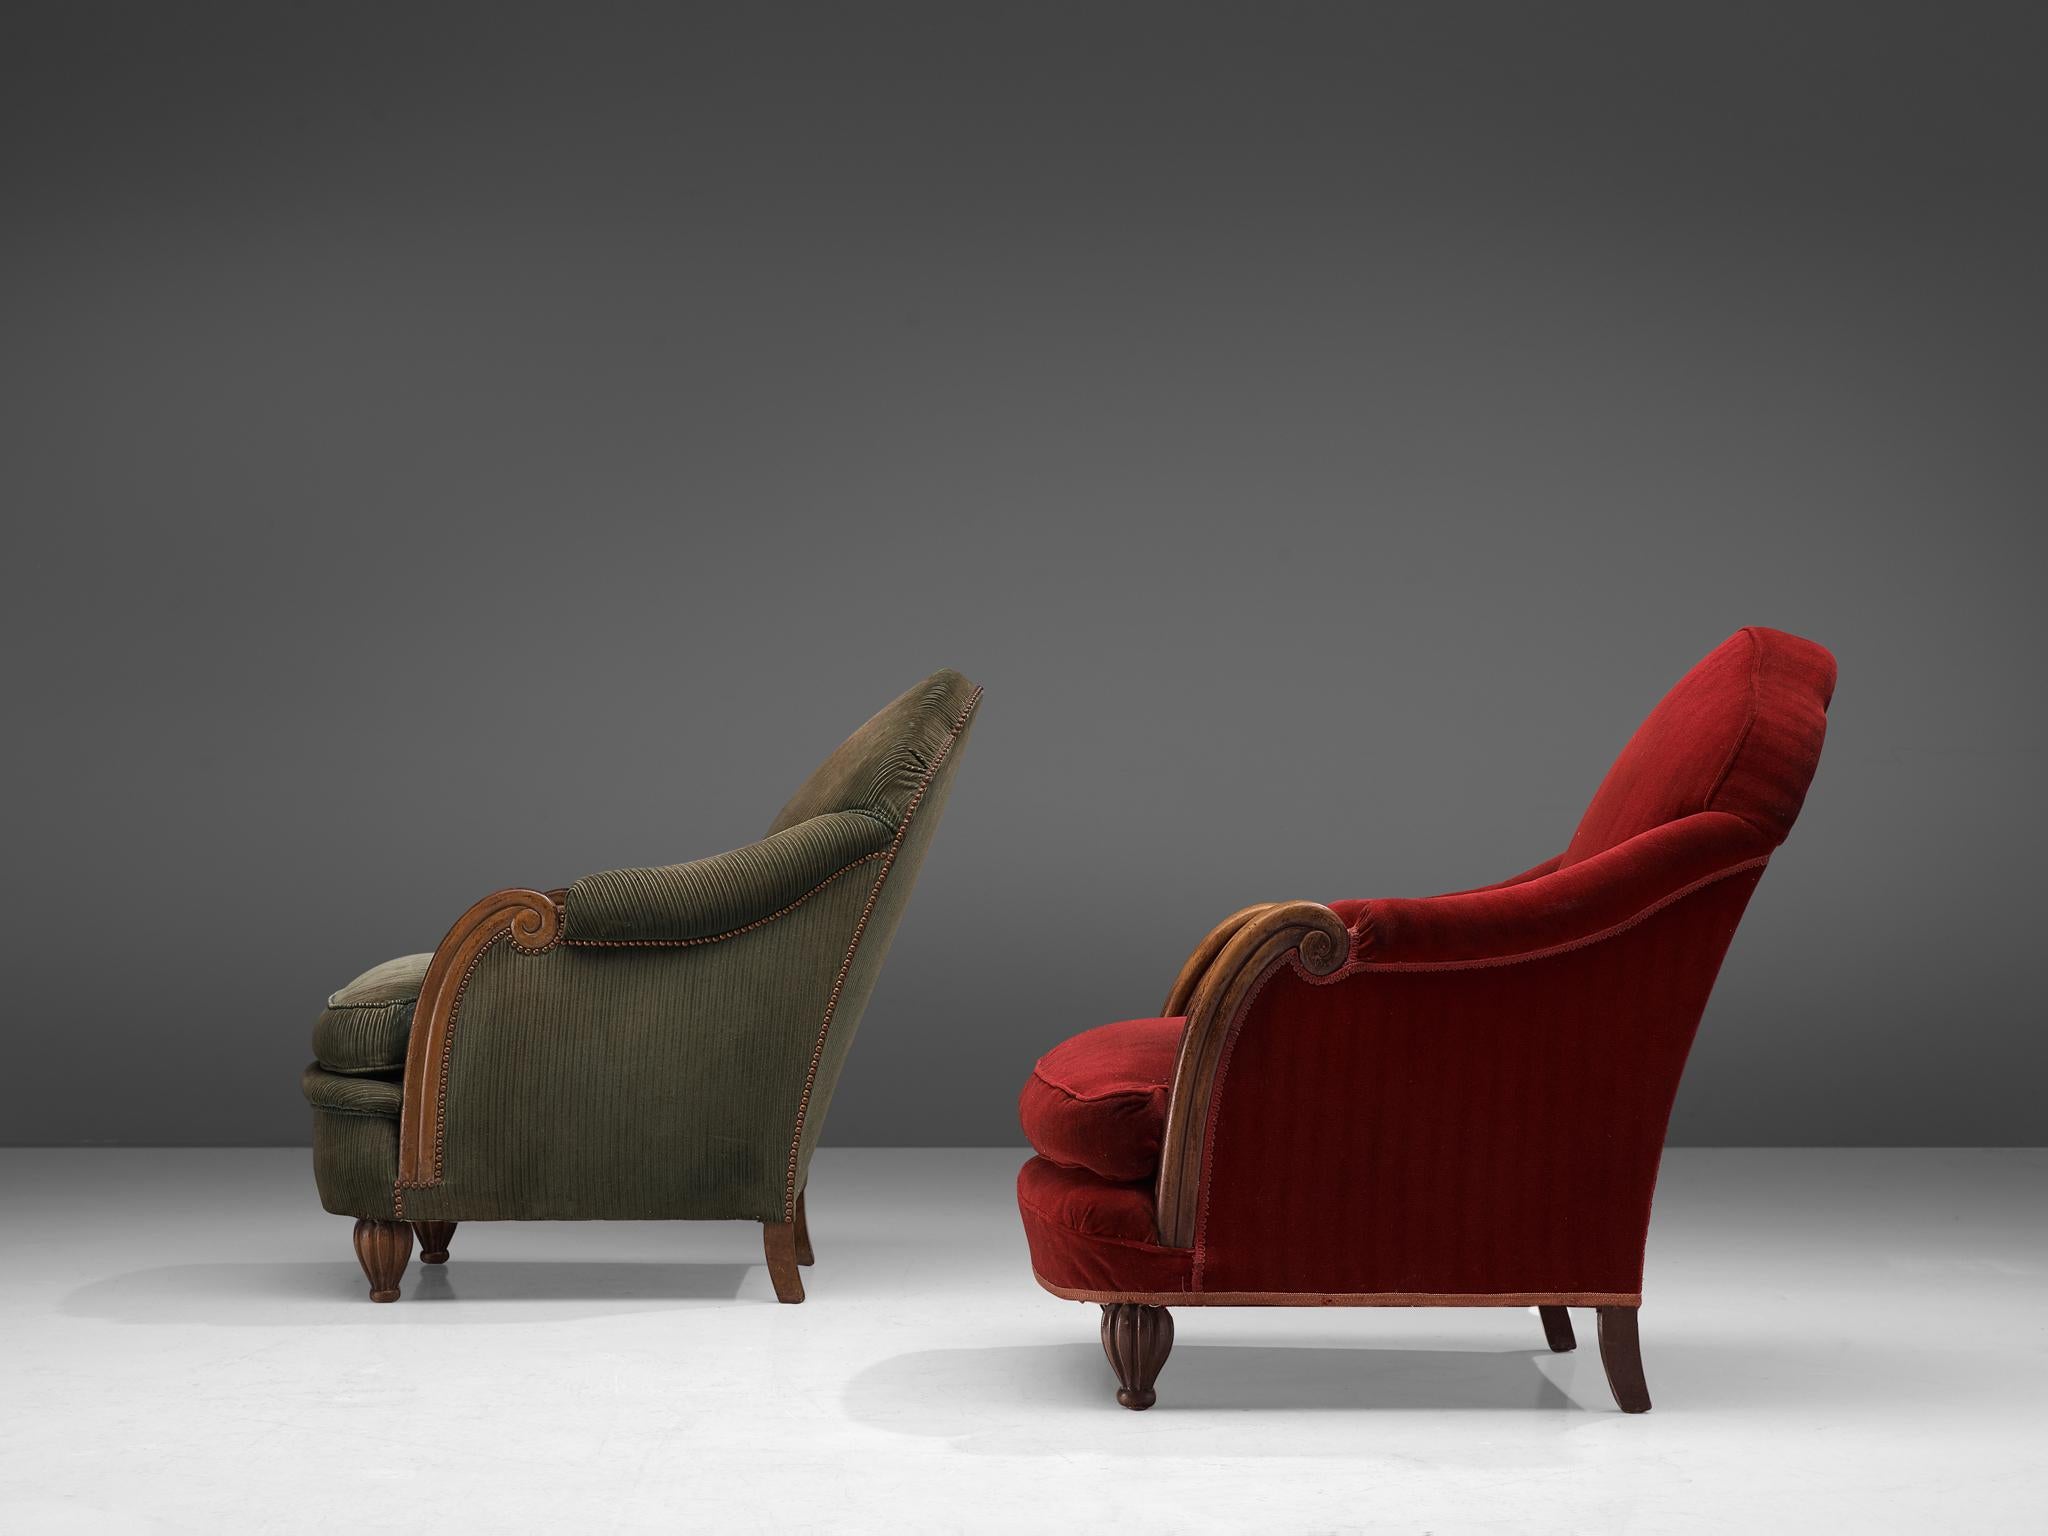 Lounge chairs, fabric and oak, France, 1930s-1940s.

These Art Deco lounge chairs feature a majestic, curved backrest with elegant, decorative armrests, and a voluptuous seat. The short legs are carved in a classical way. The voluptuous upholstery